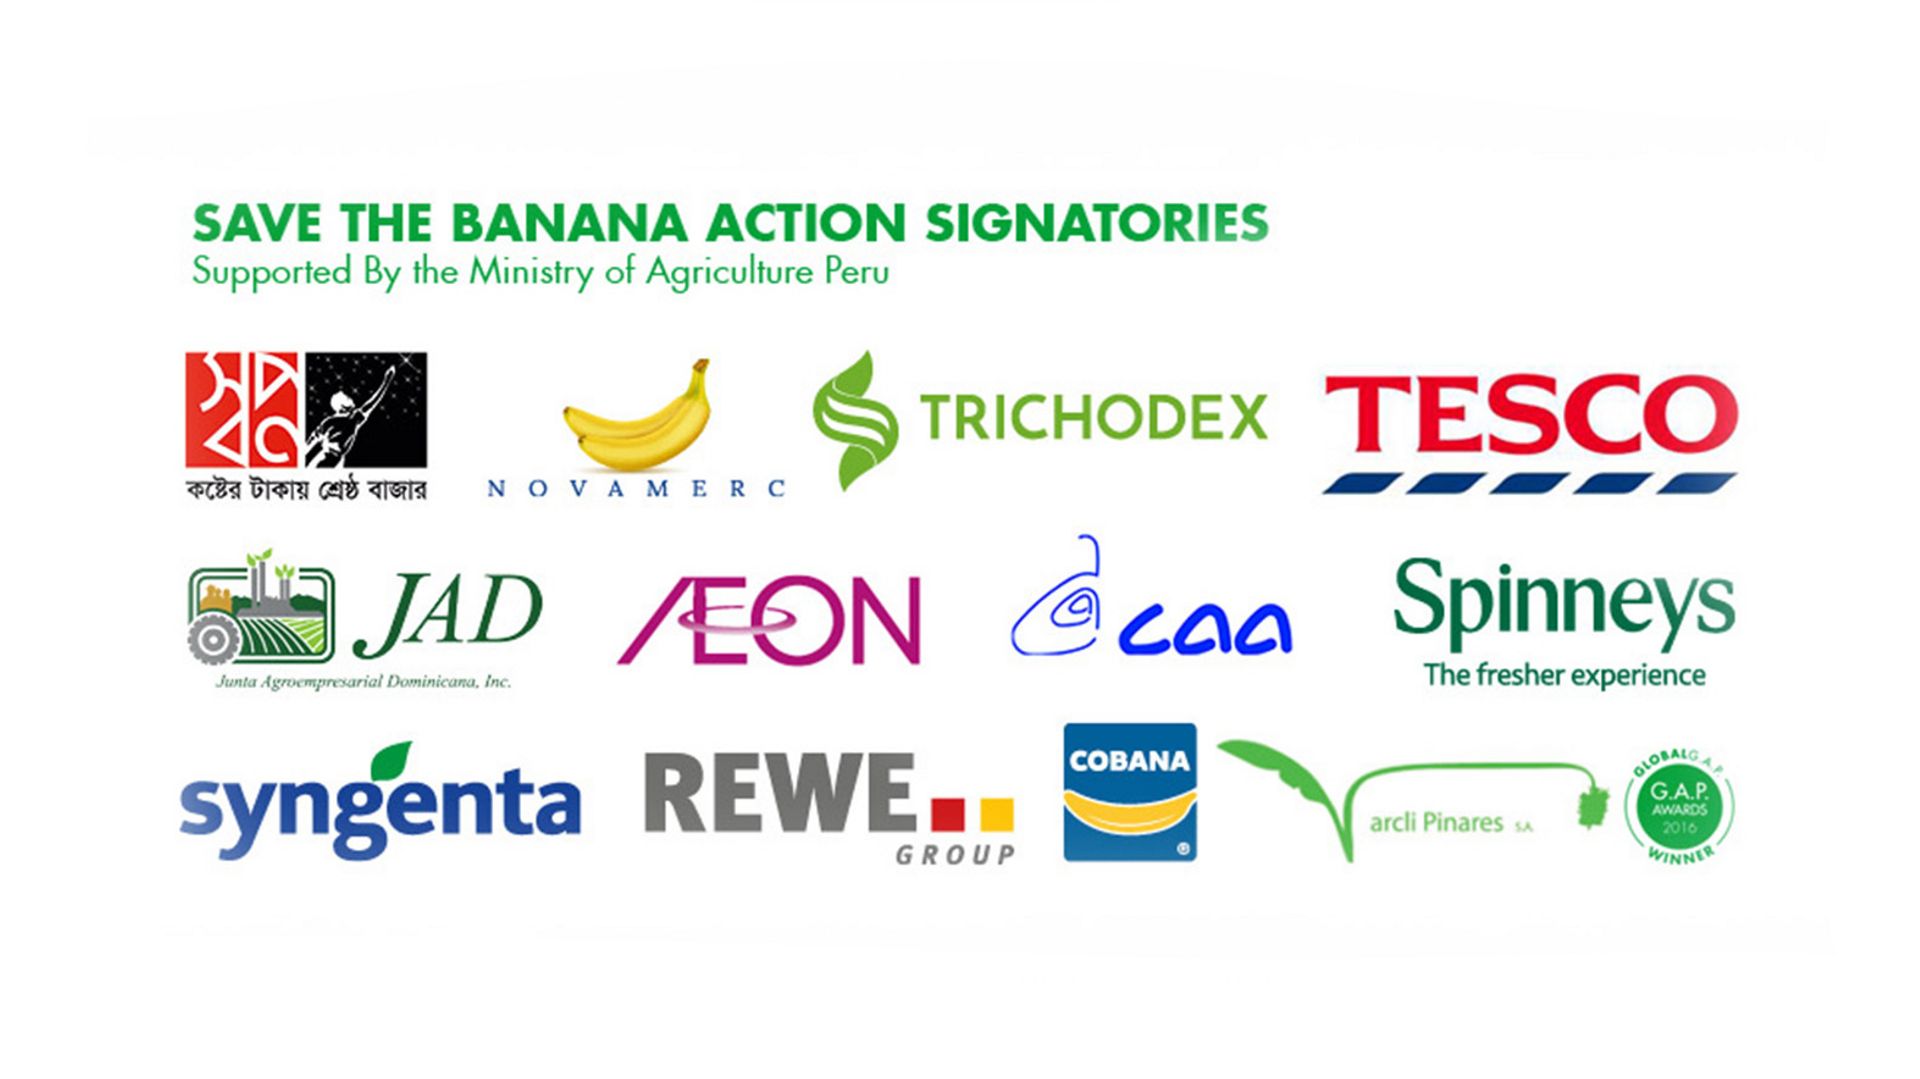 Infographic showing the signatories of the 2018 Save the Banana action plan